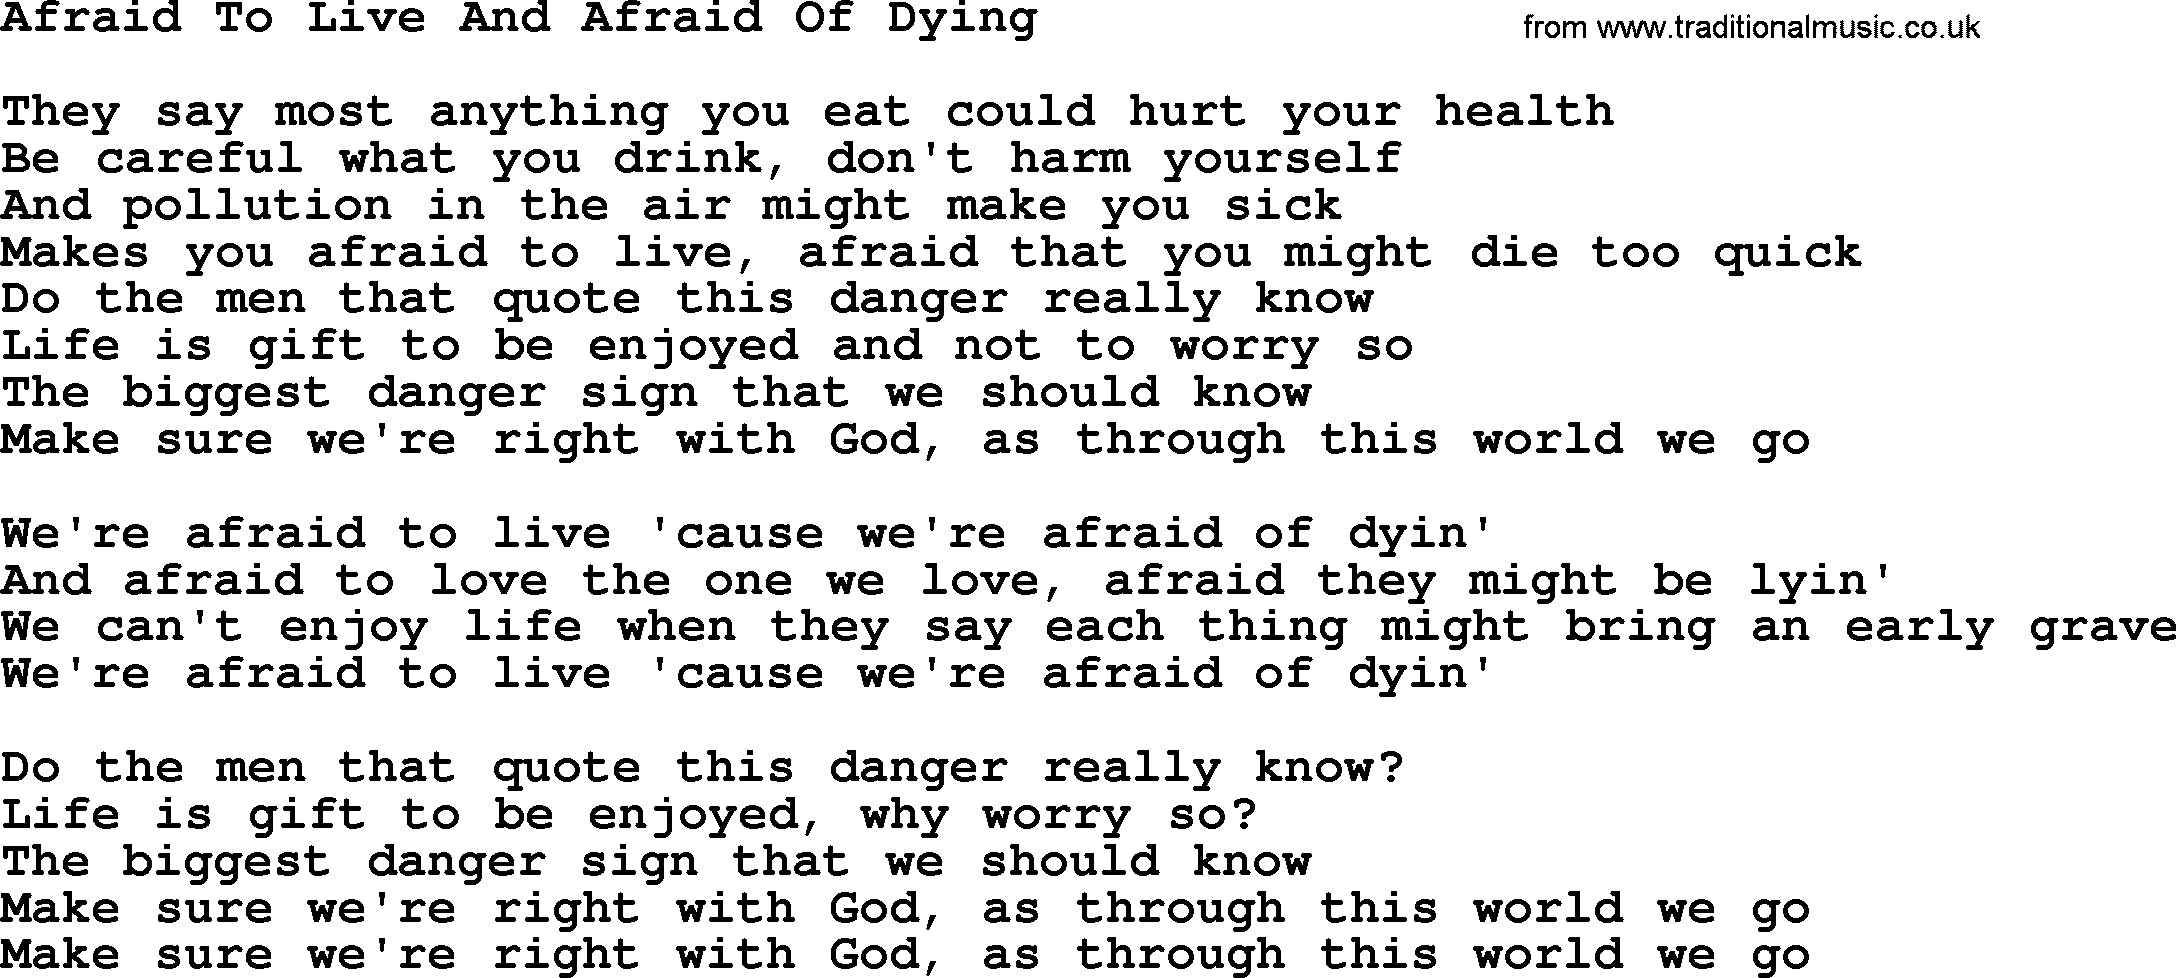 Dolly Parton song Afraid To Live And Afraid Of Dying.txt lyrics